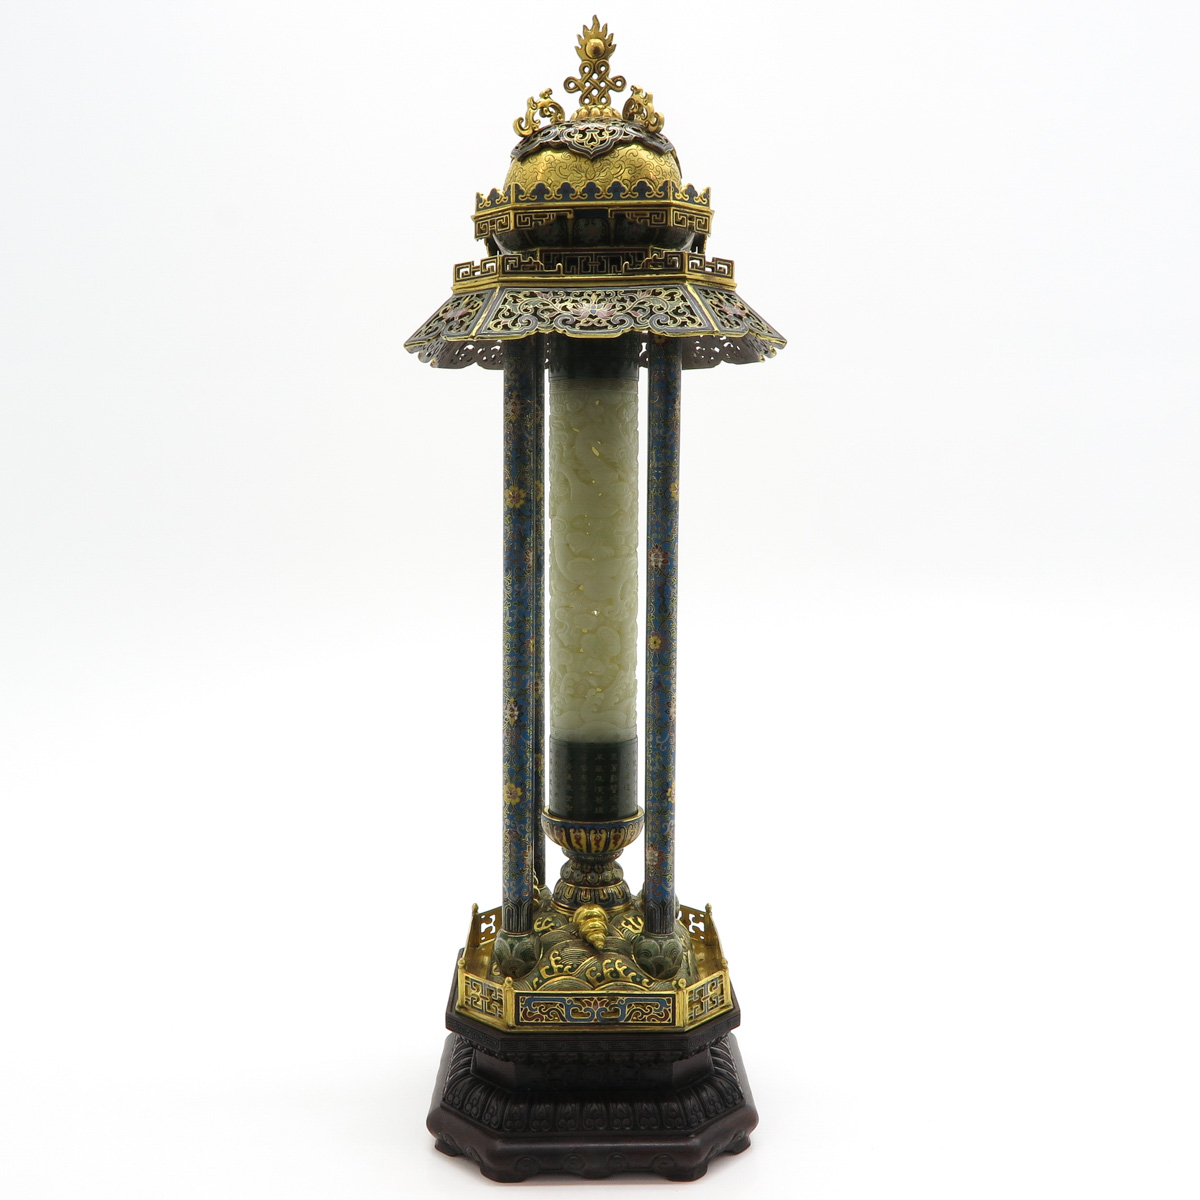 A Fine Chinese Cloisonné Censer with Carved Jade